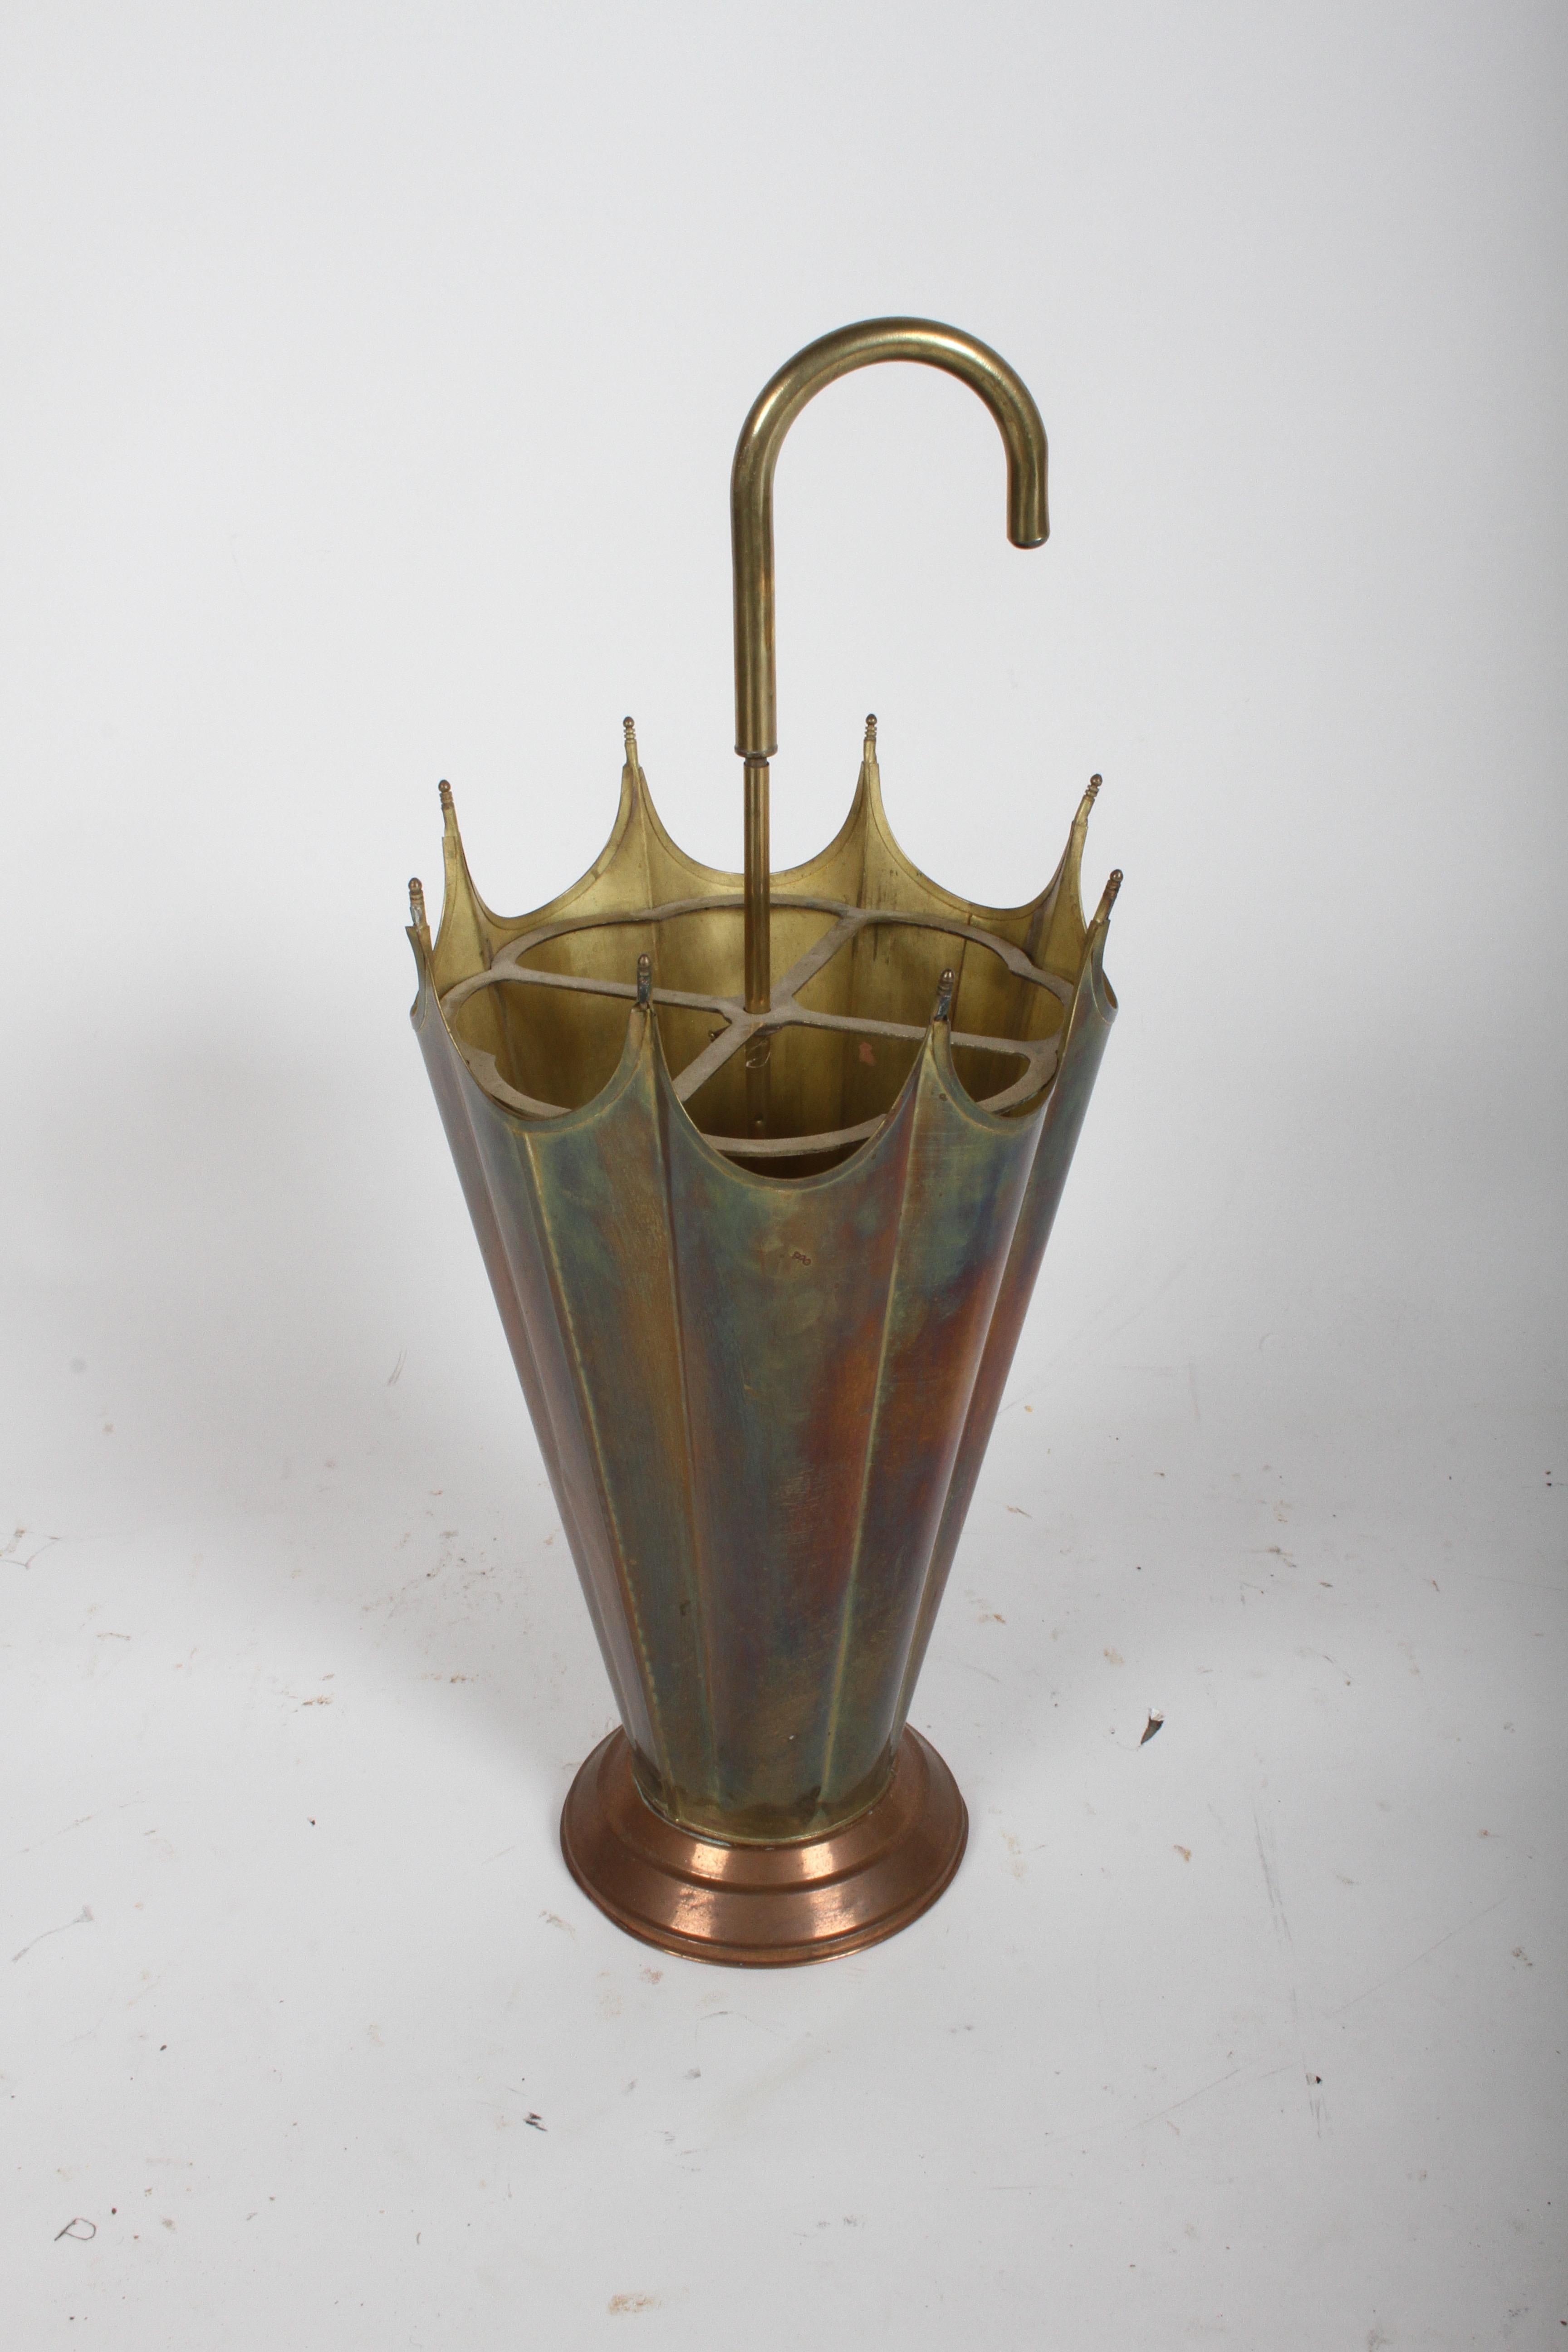 Vintage Italian brass umbrella or cane stand with patina, can be polish for additional cost. Minor dings.